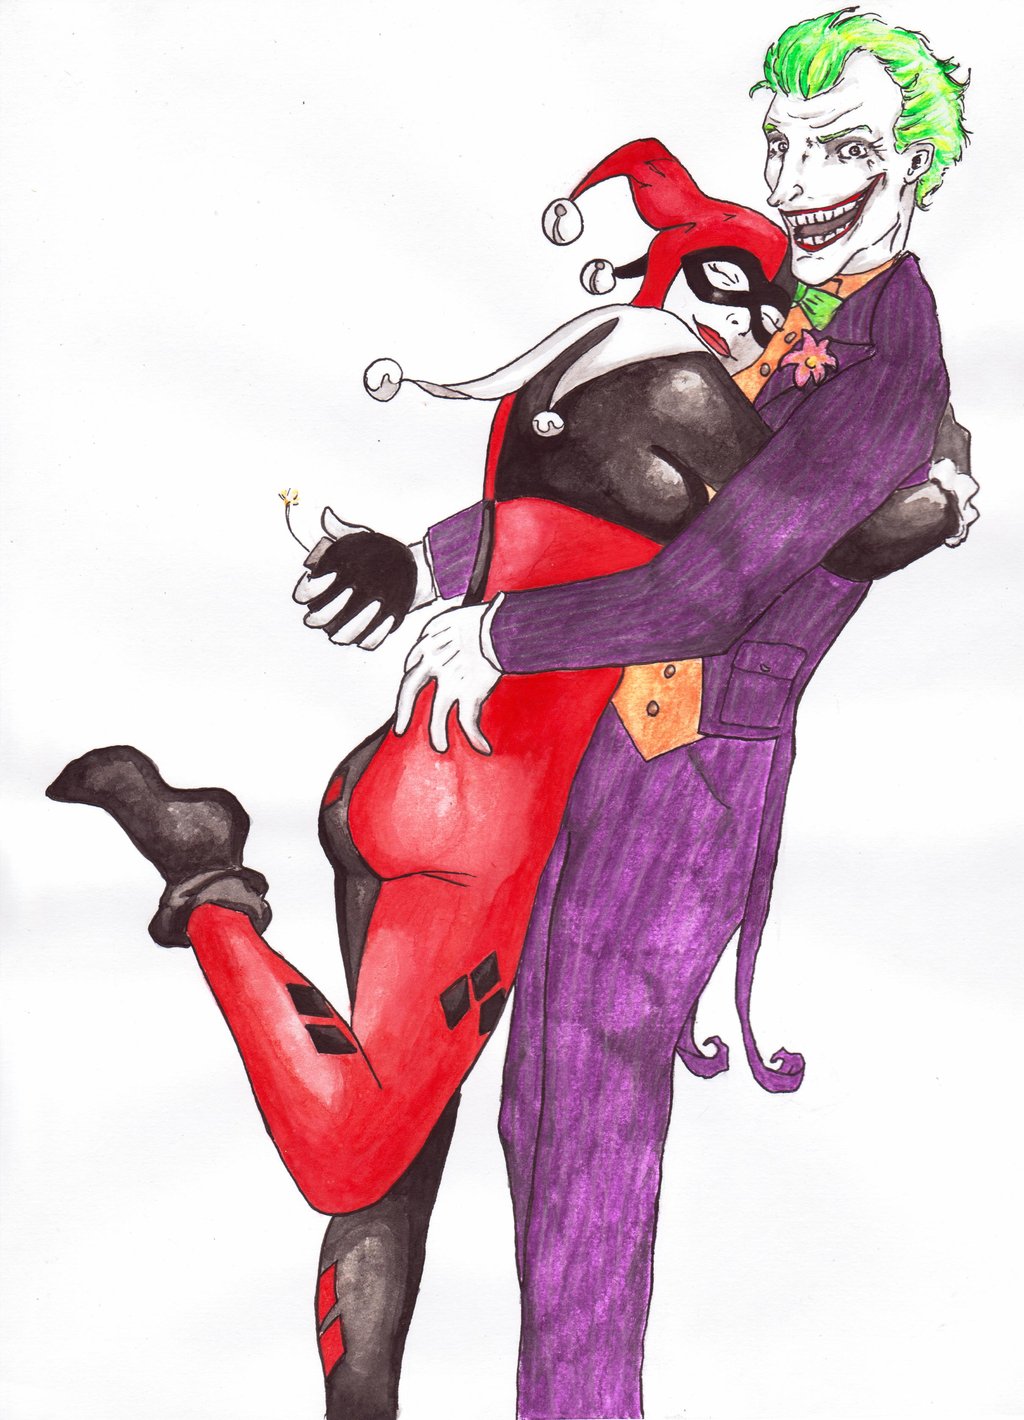 The Joker And Harley Quinn Cartoon Wallpaper Image Pictures Becuo